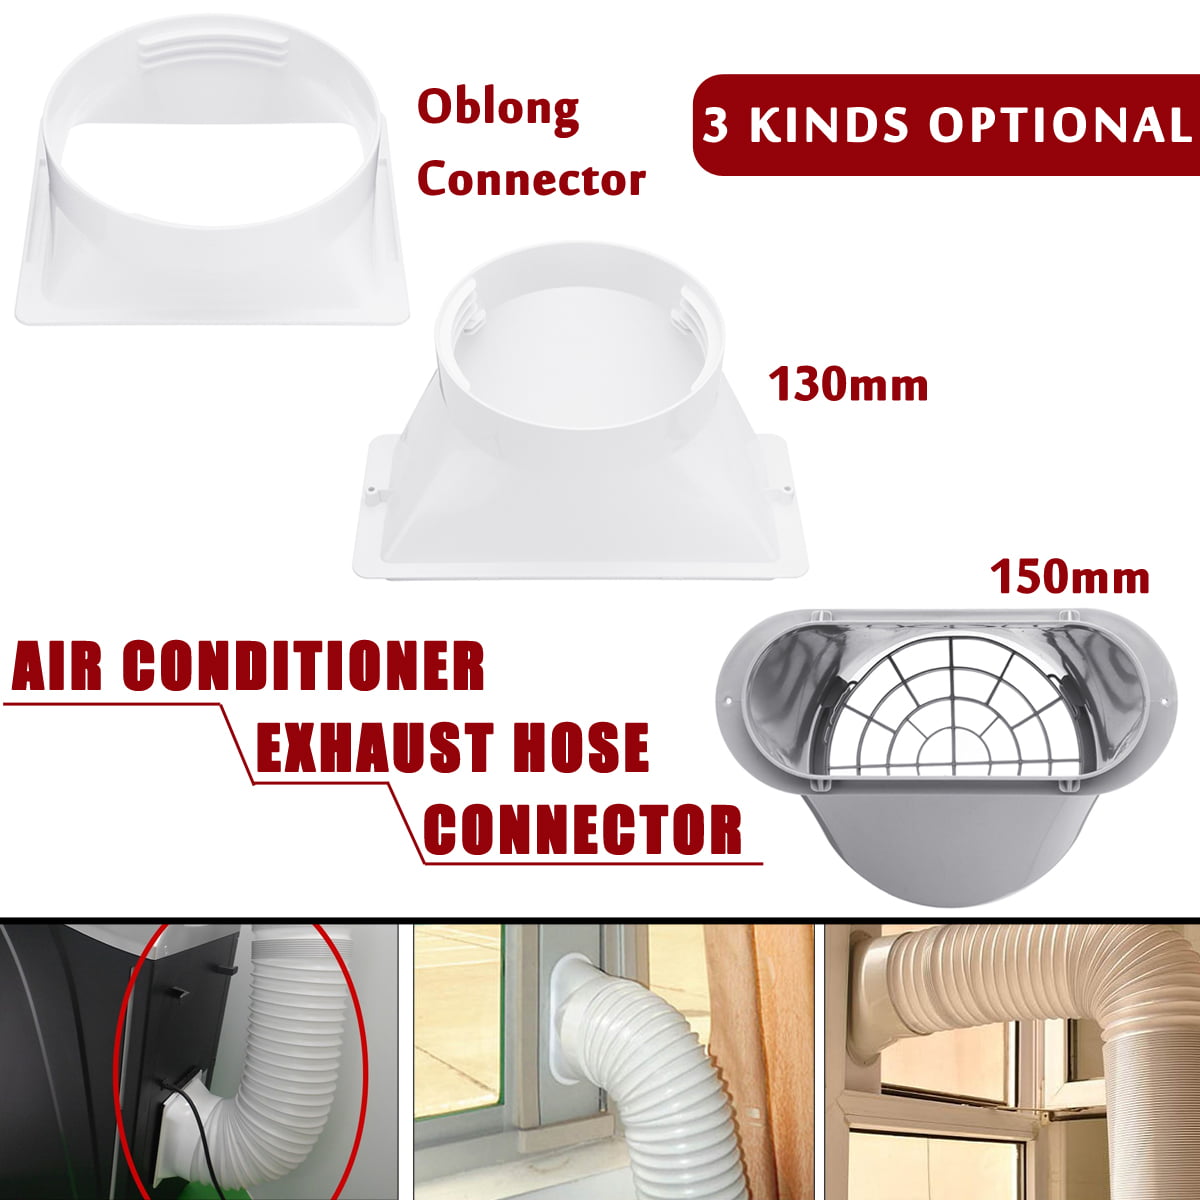 Exhaust Hose Window Adaptor Kit For Portable Air Conditioner Tube ConnectorSN